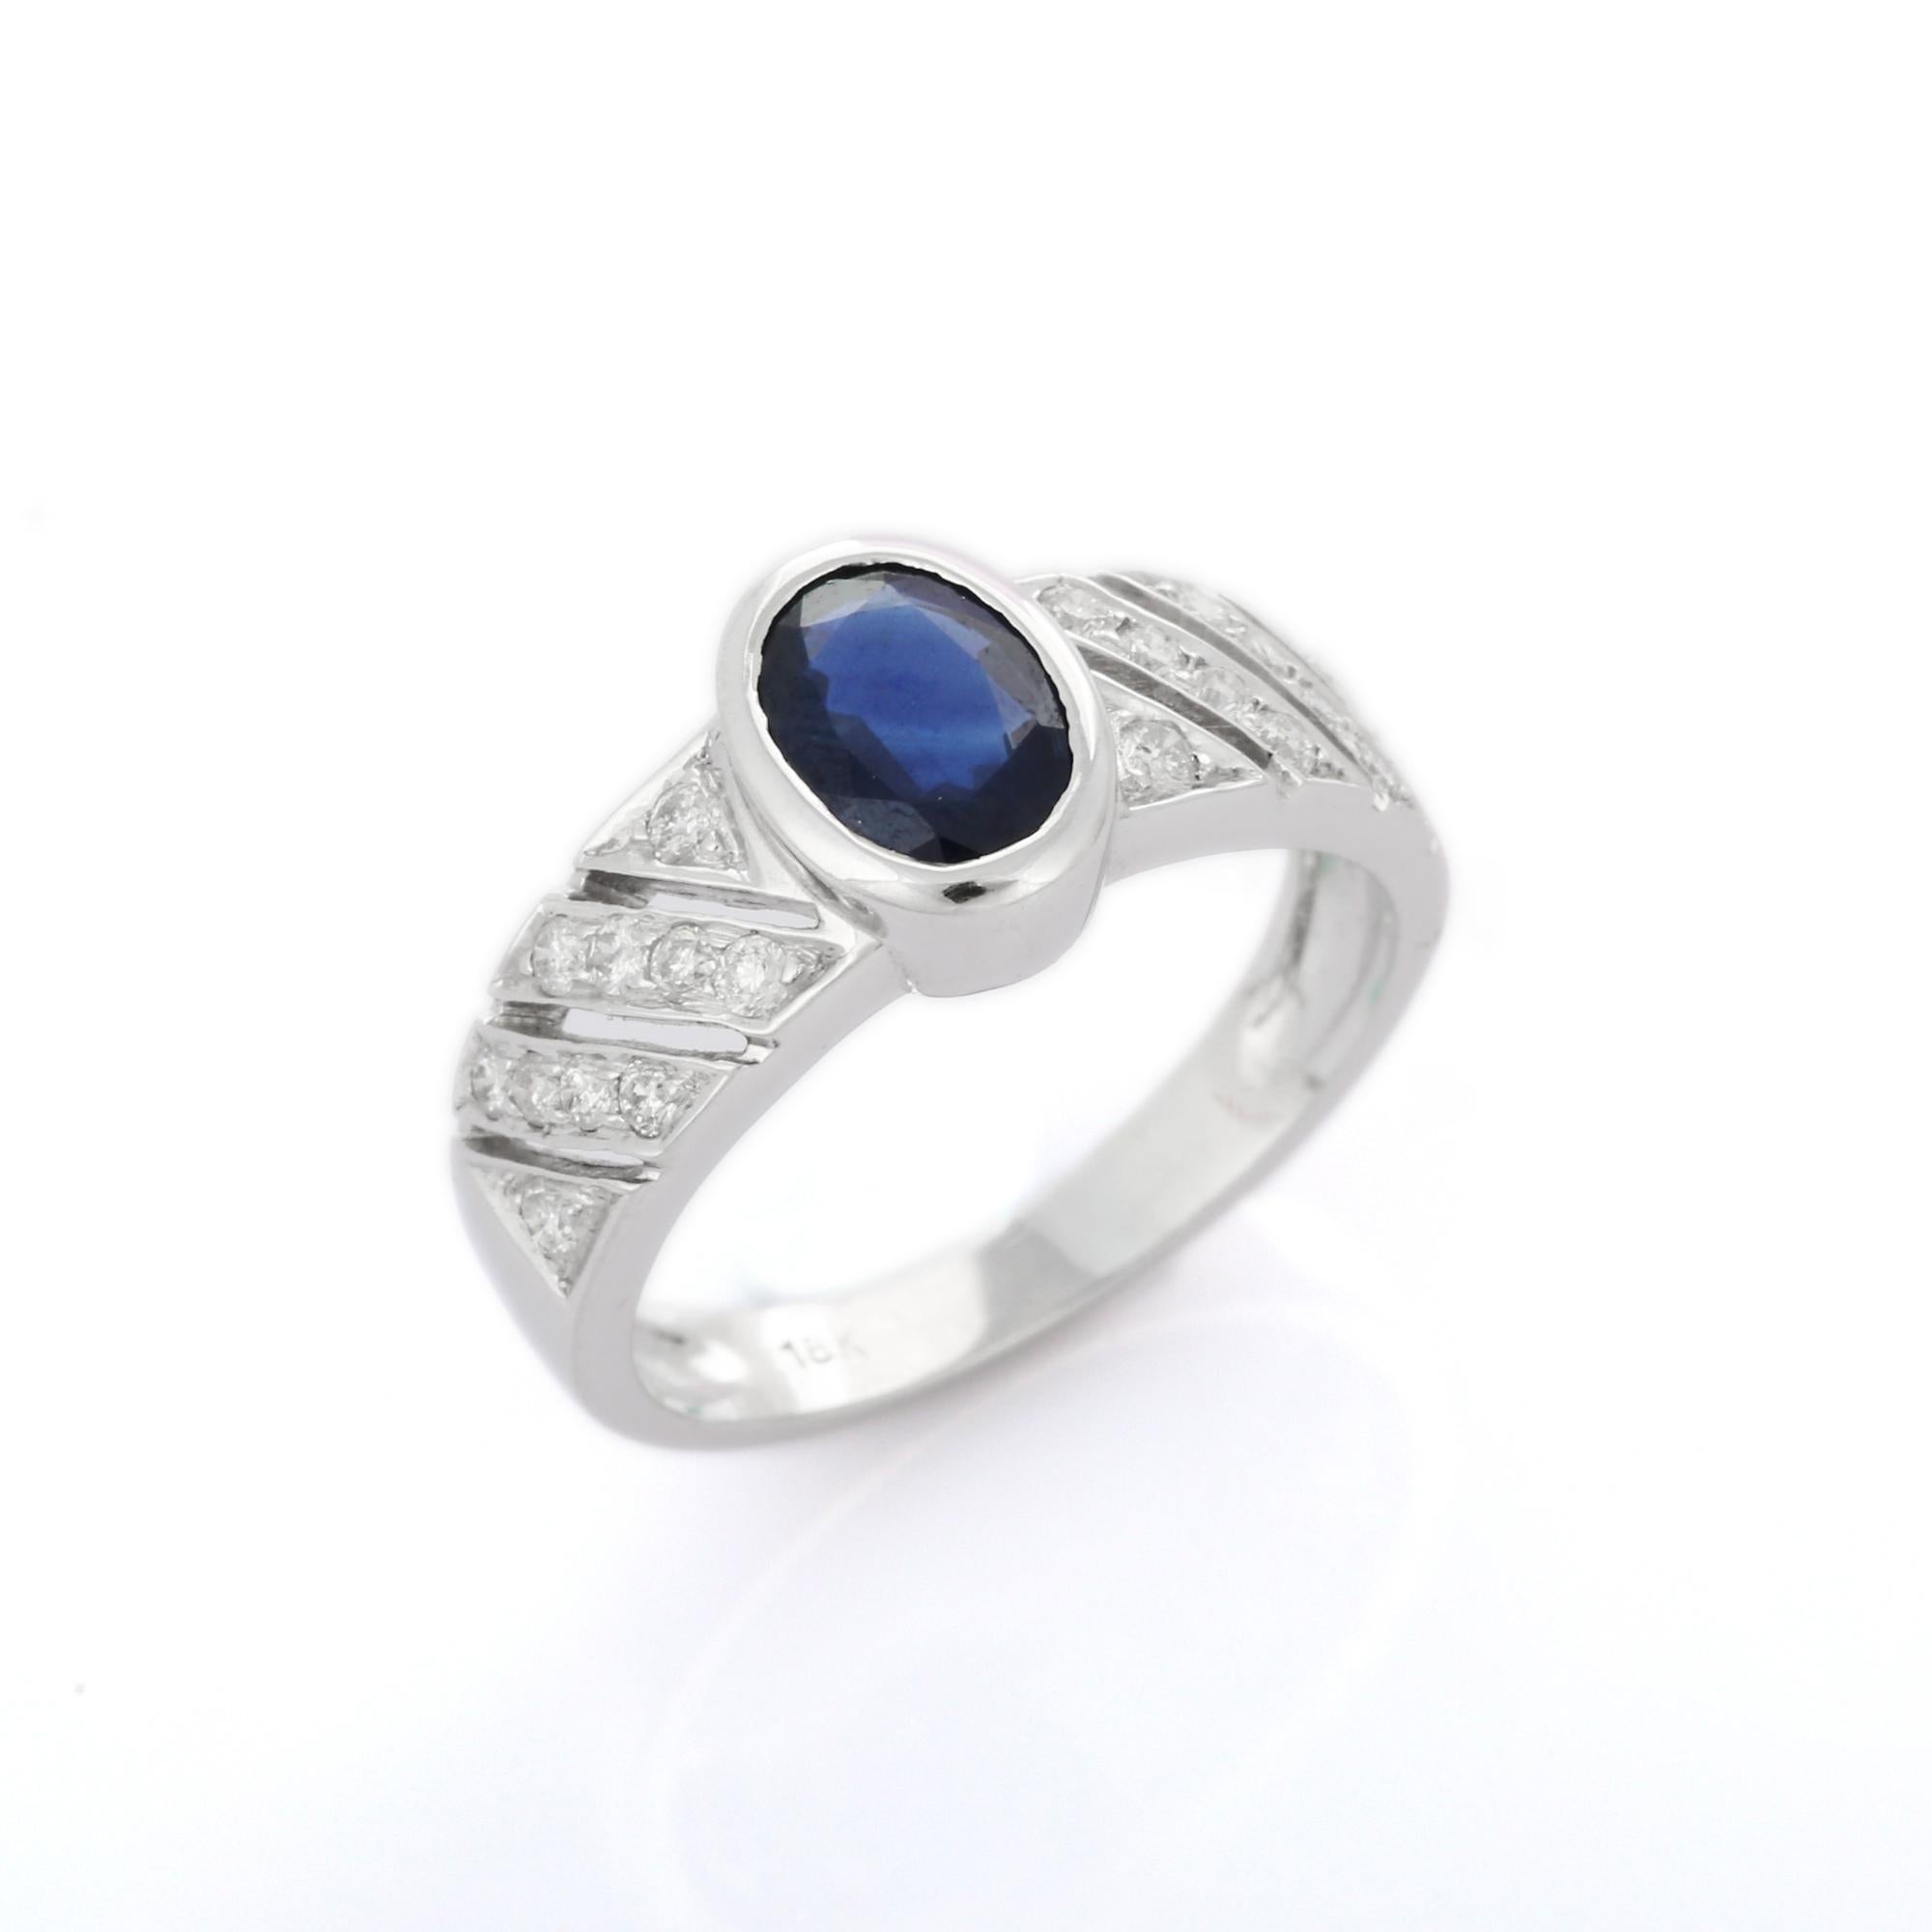 For Sale:  Exquisite Deep Blue Sapphire Diamond Unisex Engagement Ring in 18k White Gold 8